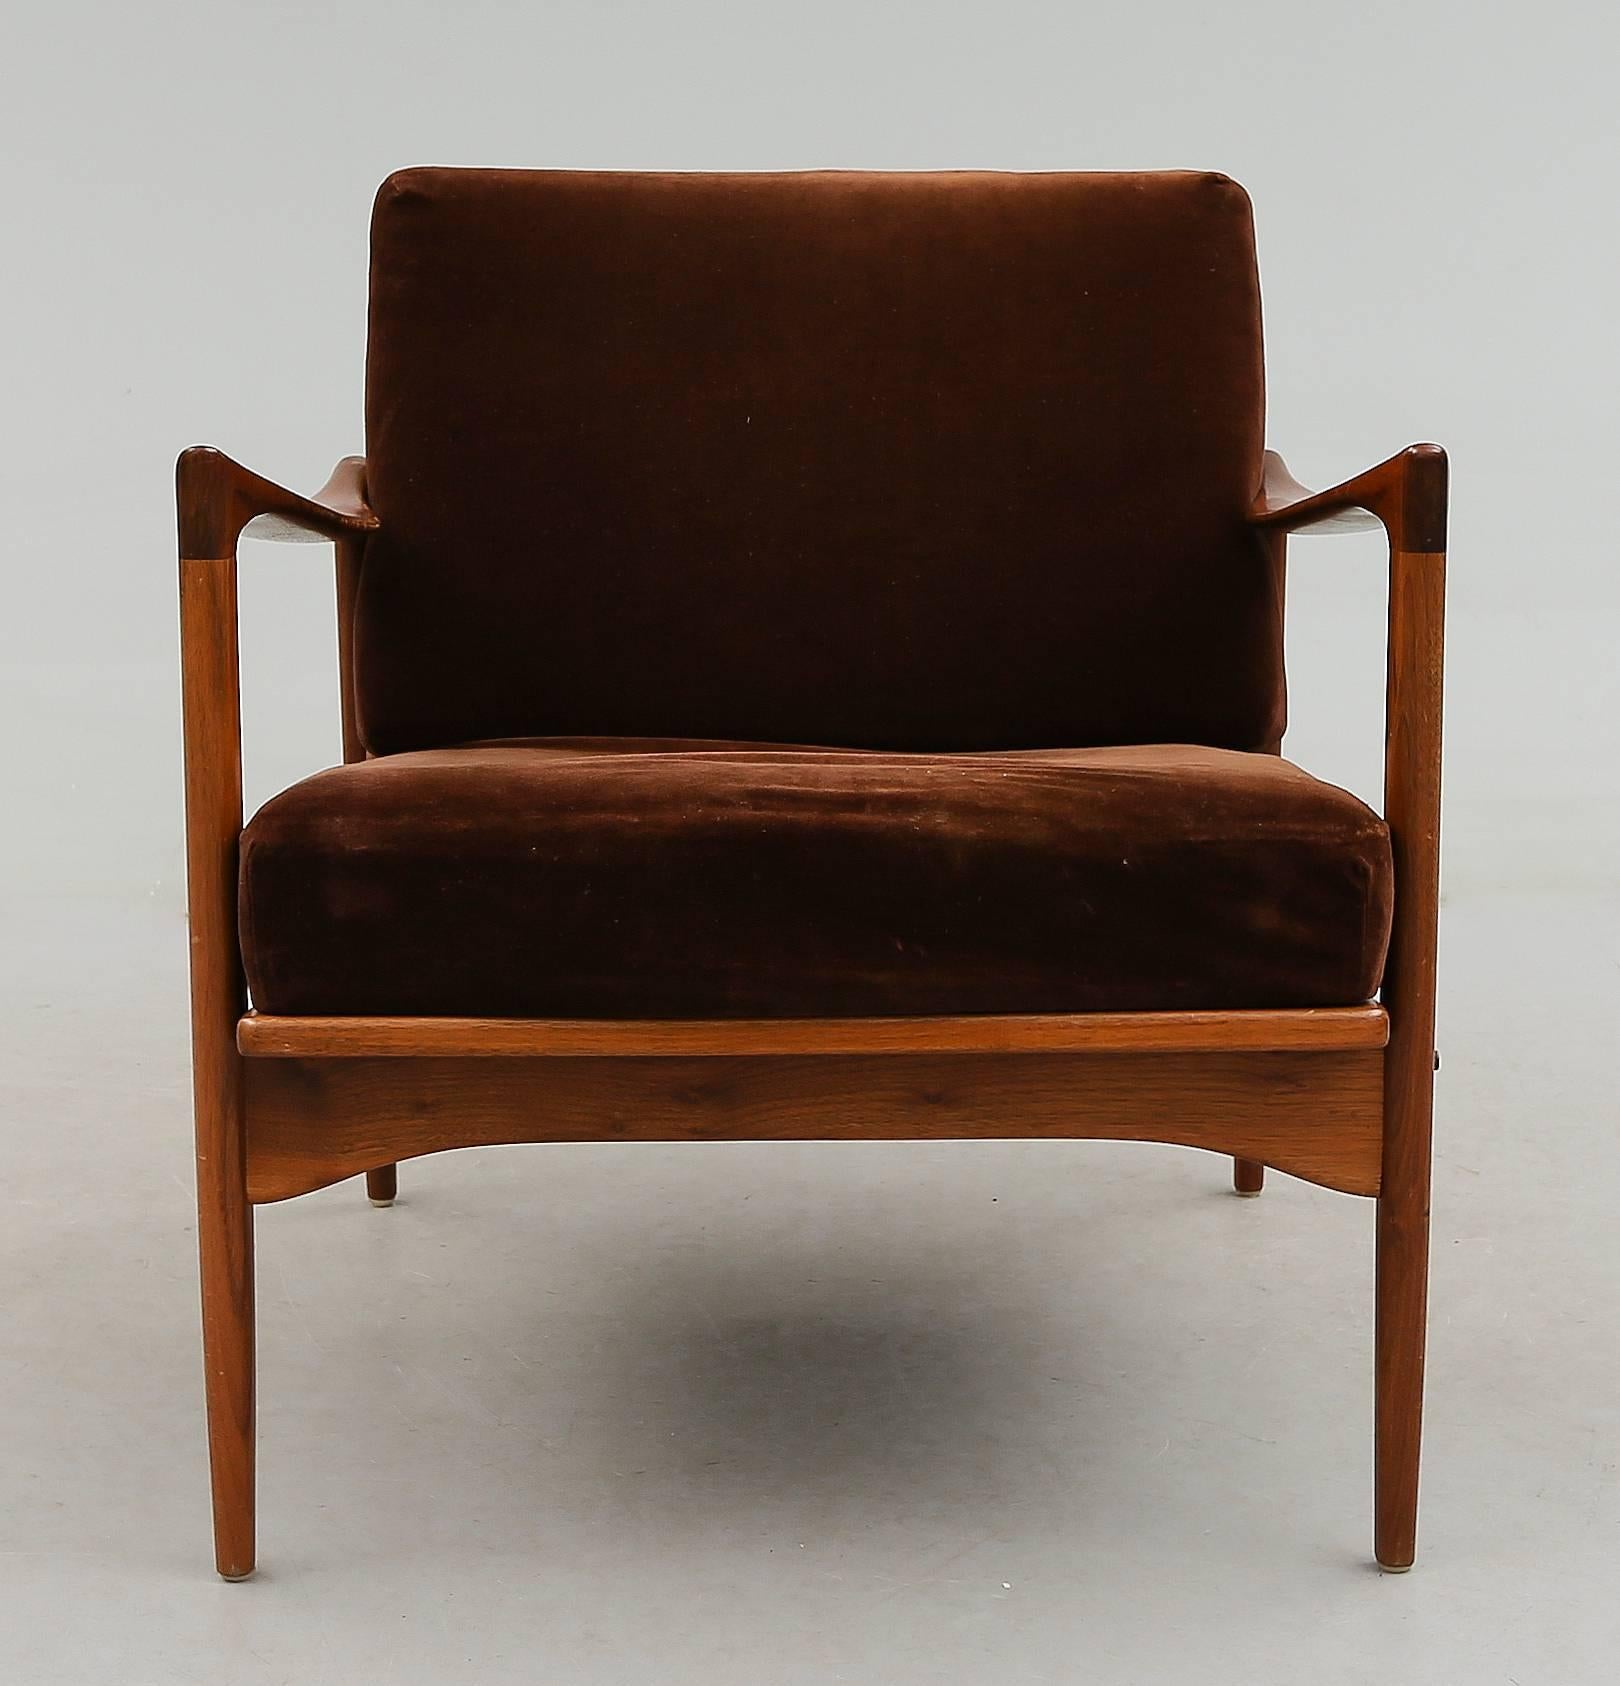 This Kandidaten easy chair was designed by Ib Kofod-Larsen and manufactured in Sweden by Olof Person in 1962.It is made from solid teak and features cylindrical tapered legs with long bowed armrests. In a very good vintage condition.